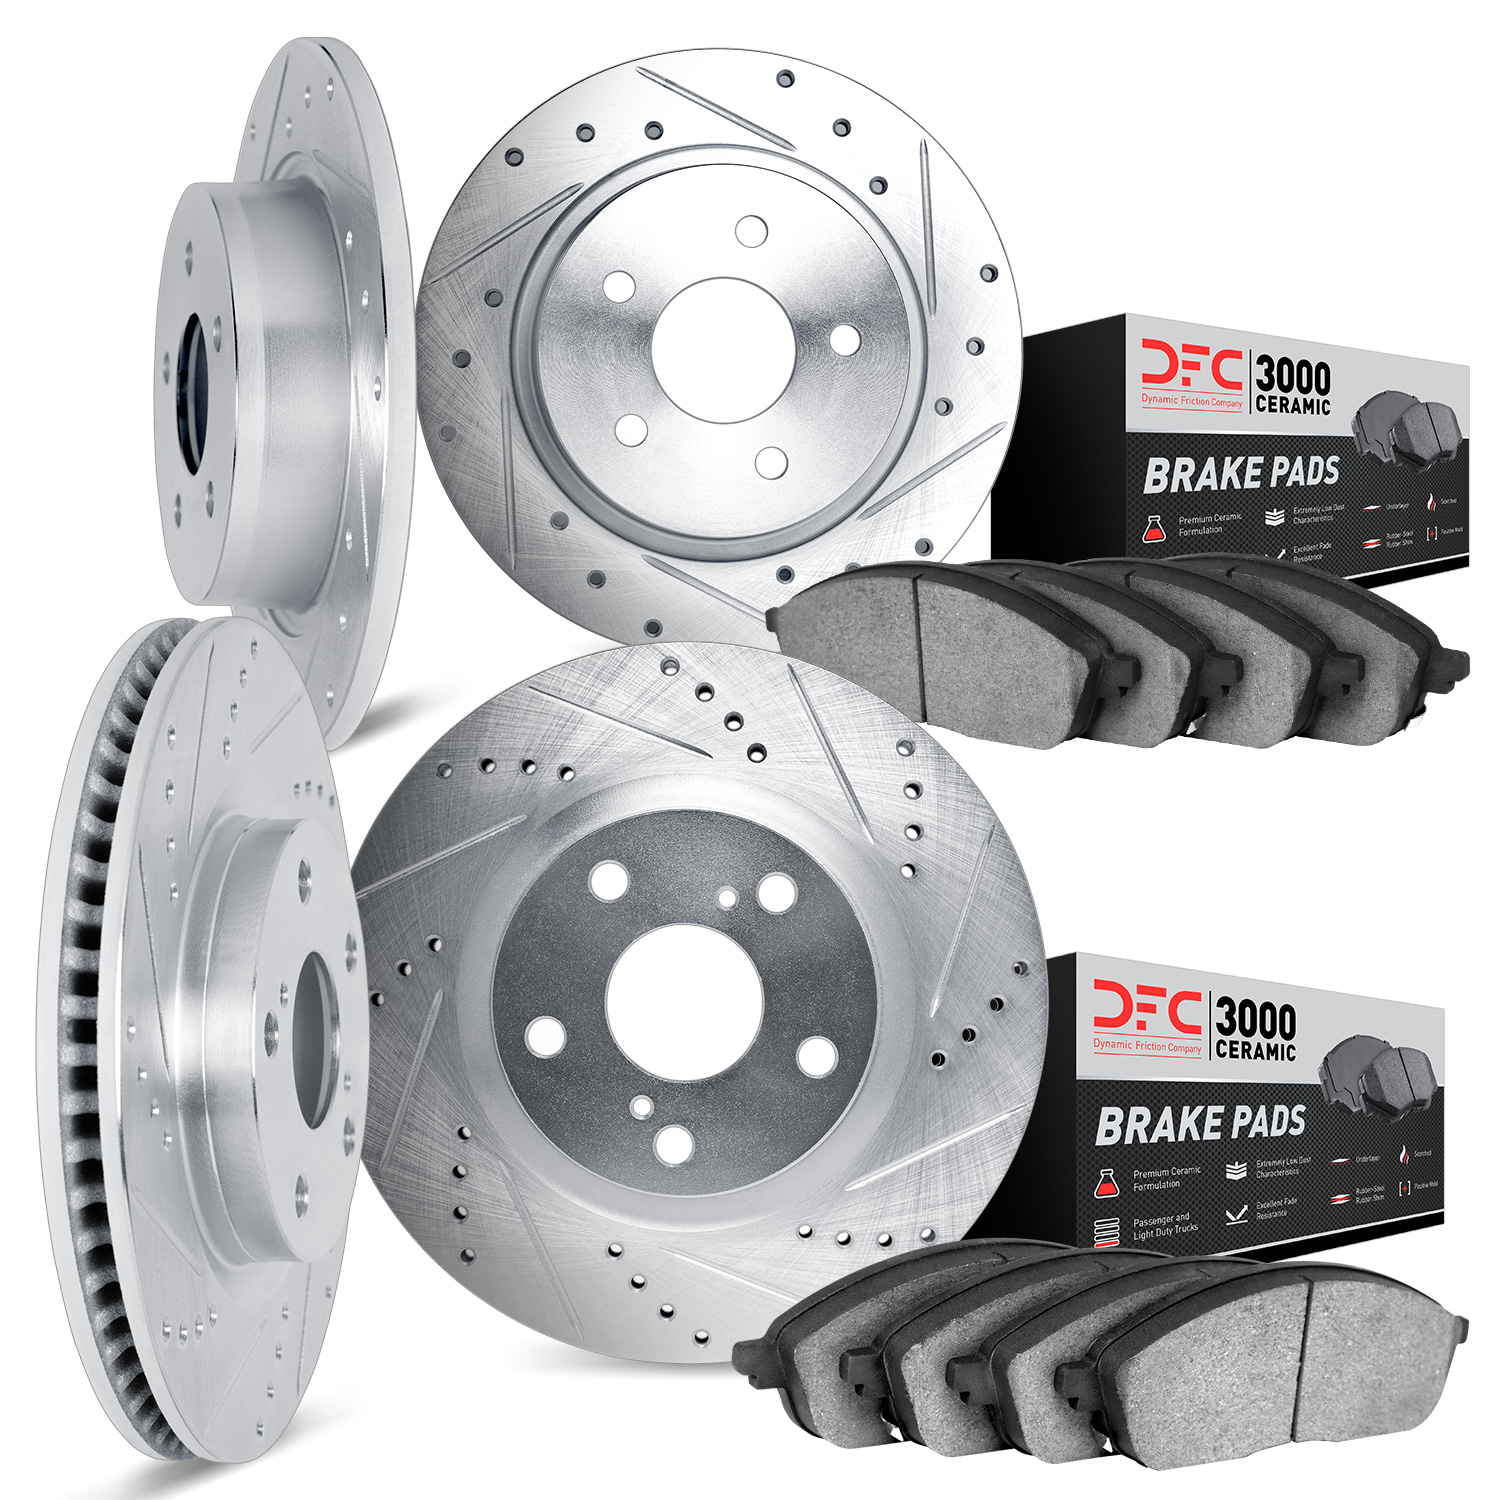 7304-54026 Drilled/Slotted Brake Rotor with 3000-Series Ceramic Brake Pads Kit [Silver], 1995-2002 Ford/Lincoln/Mercury/Mazda, P